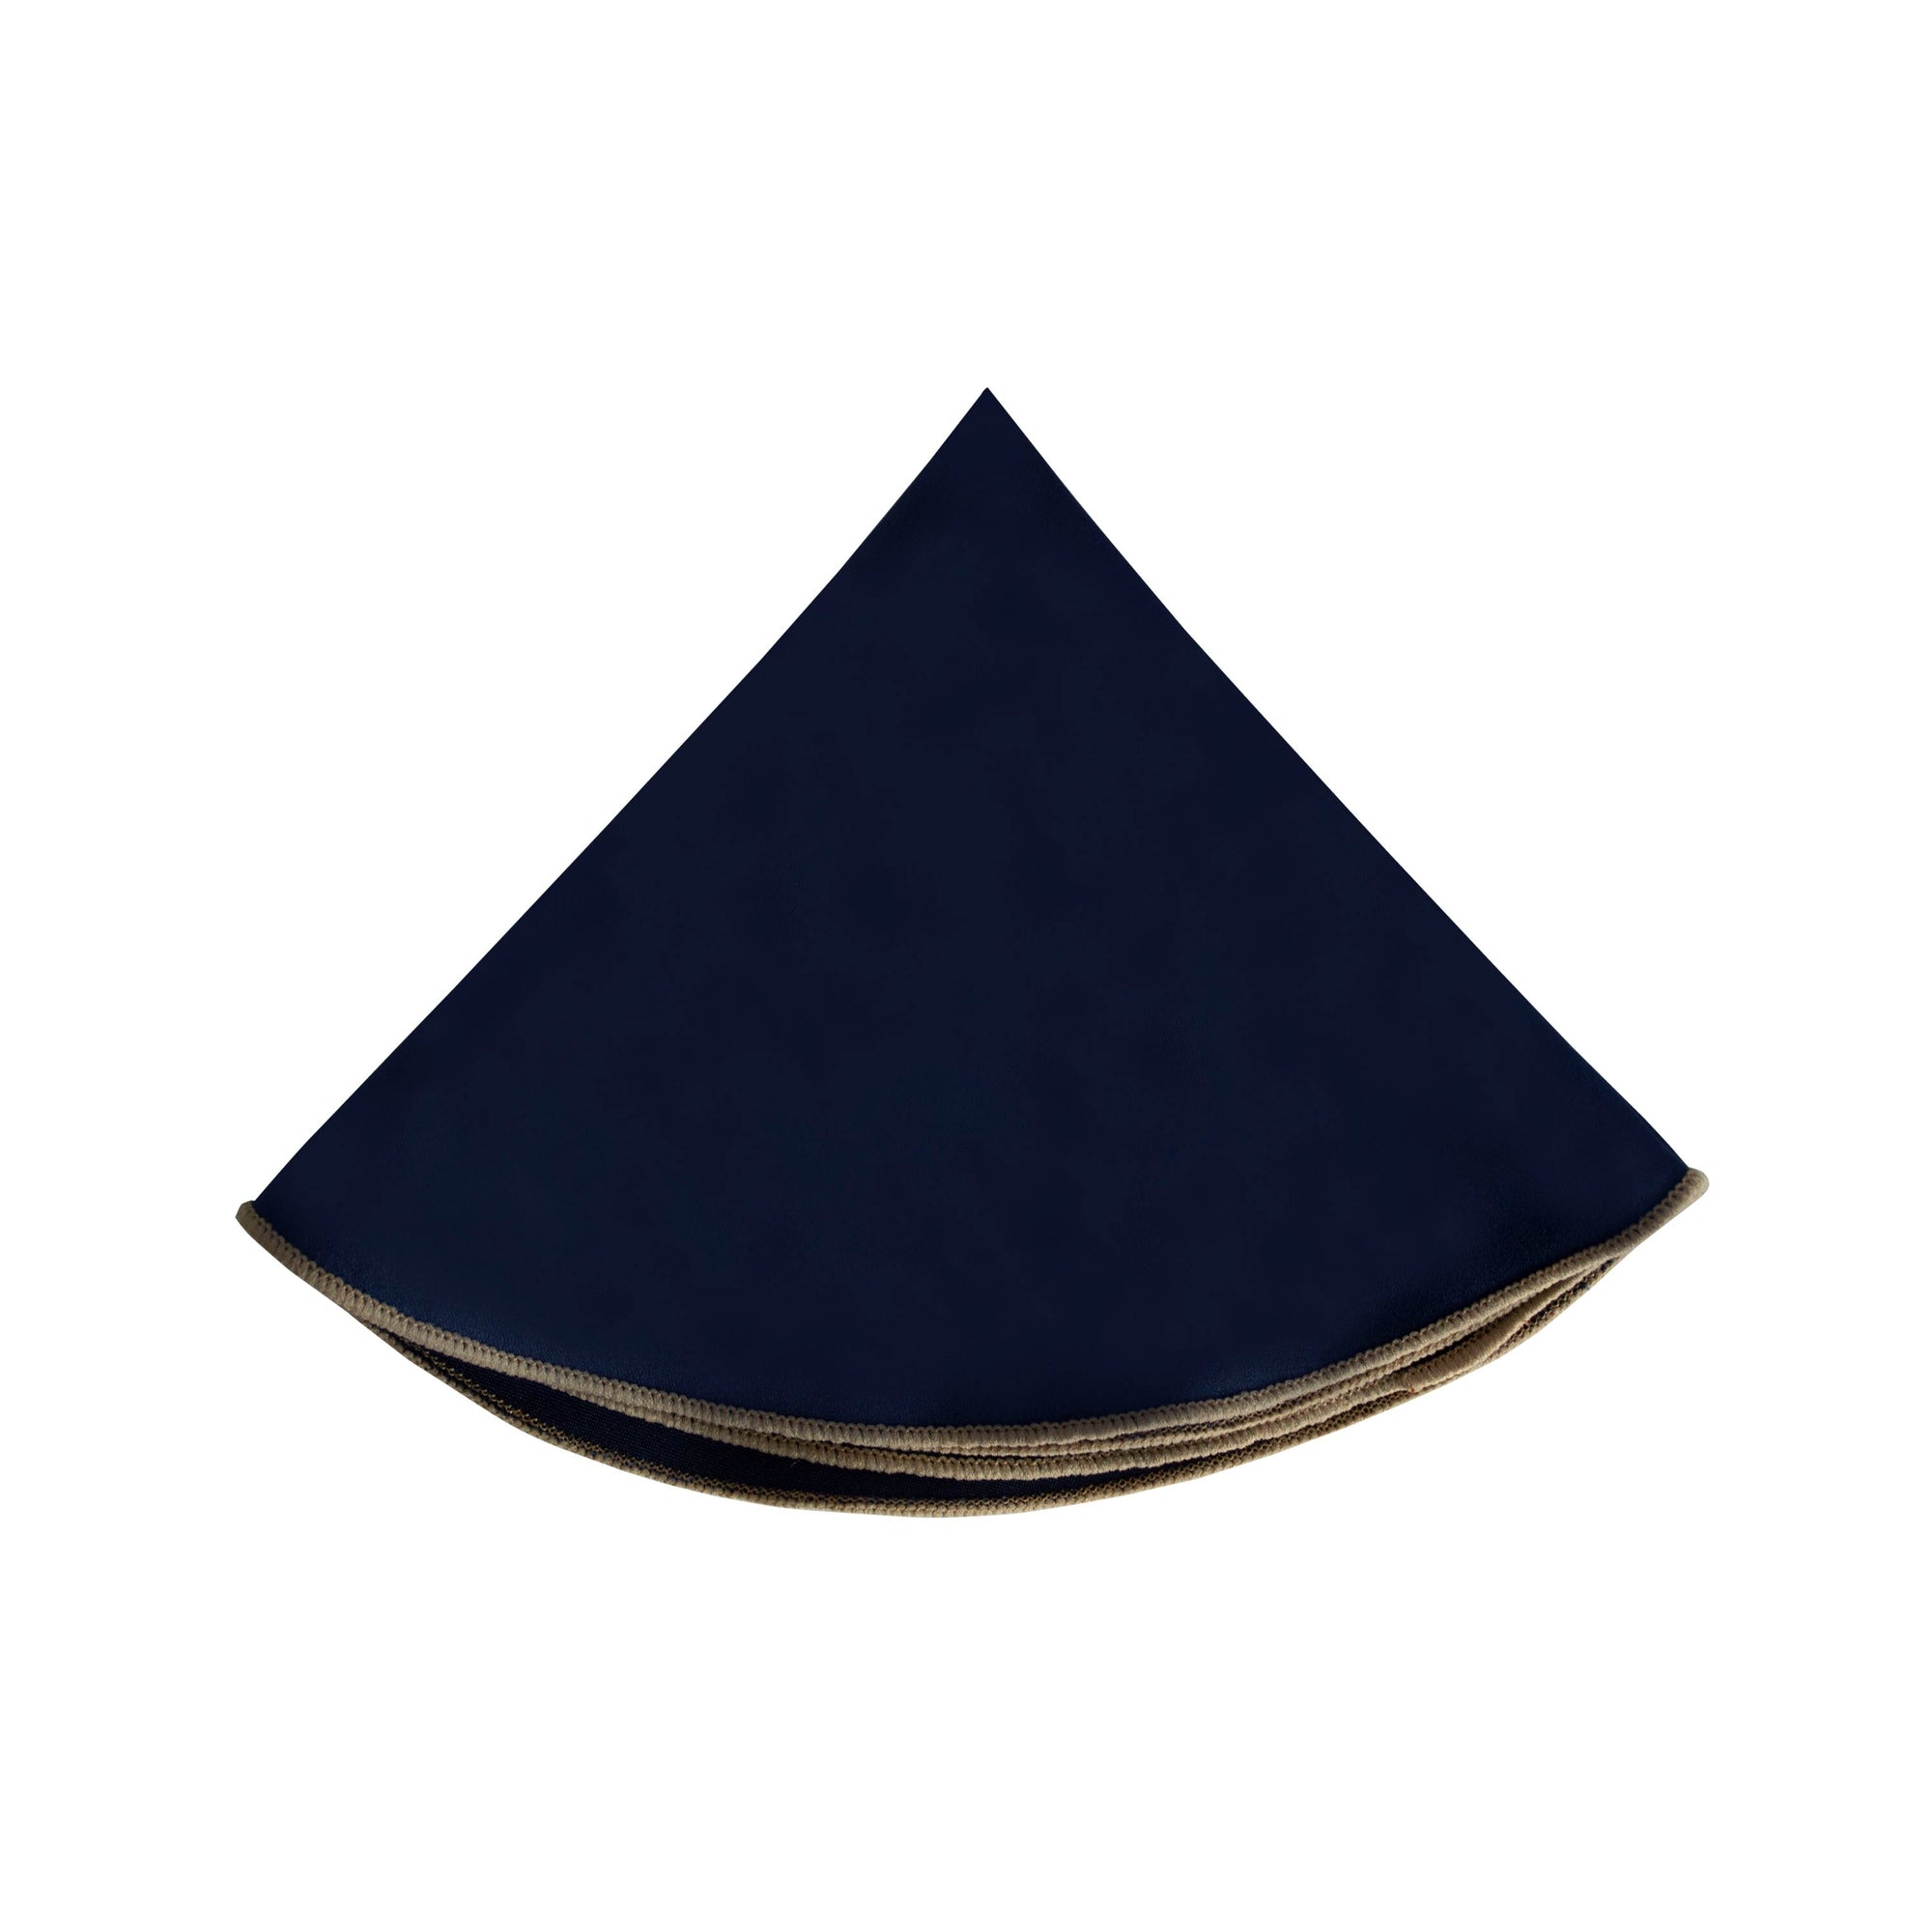 Round Pocket Square in Navy with Light Gold Edges-Pocket Squares-MarZthomson-Cufflinks.com.sg